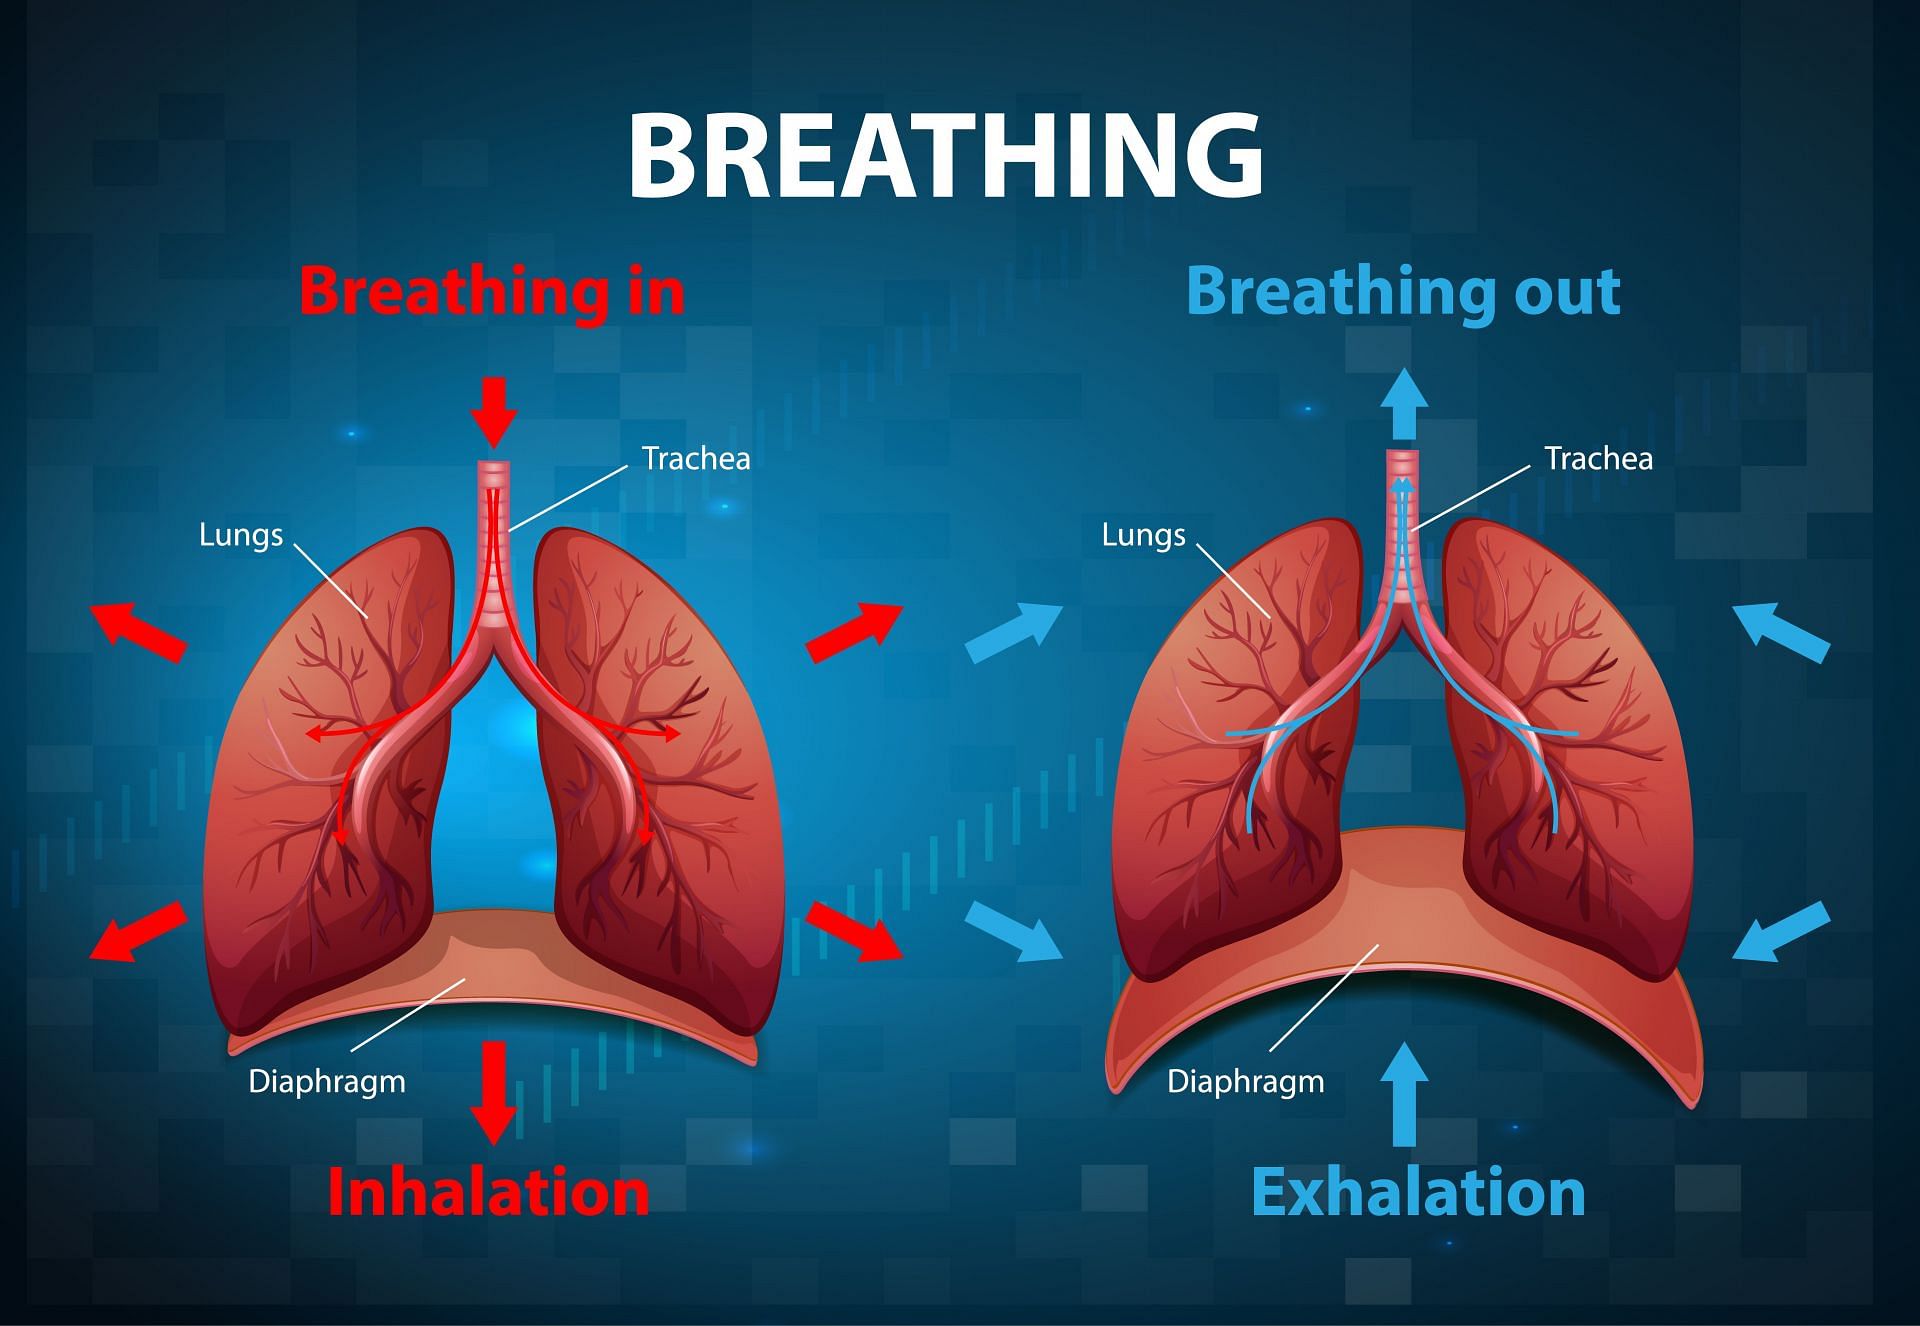 Taking control over your breath is an essential part of mindfulness. (Image via Freepik/Freepik)